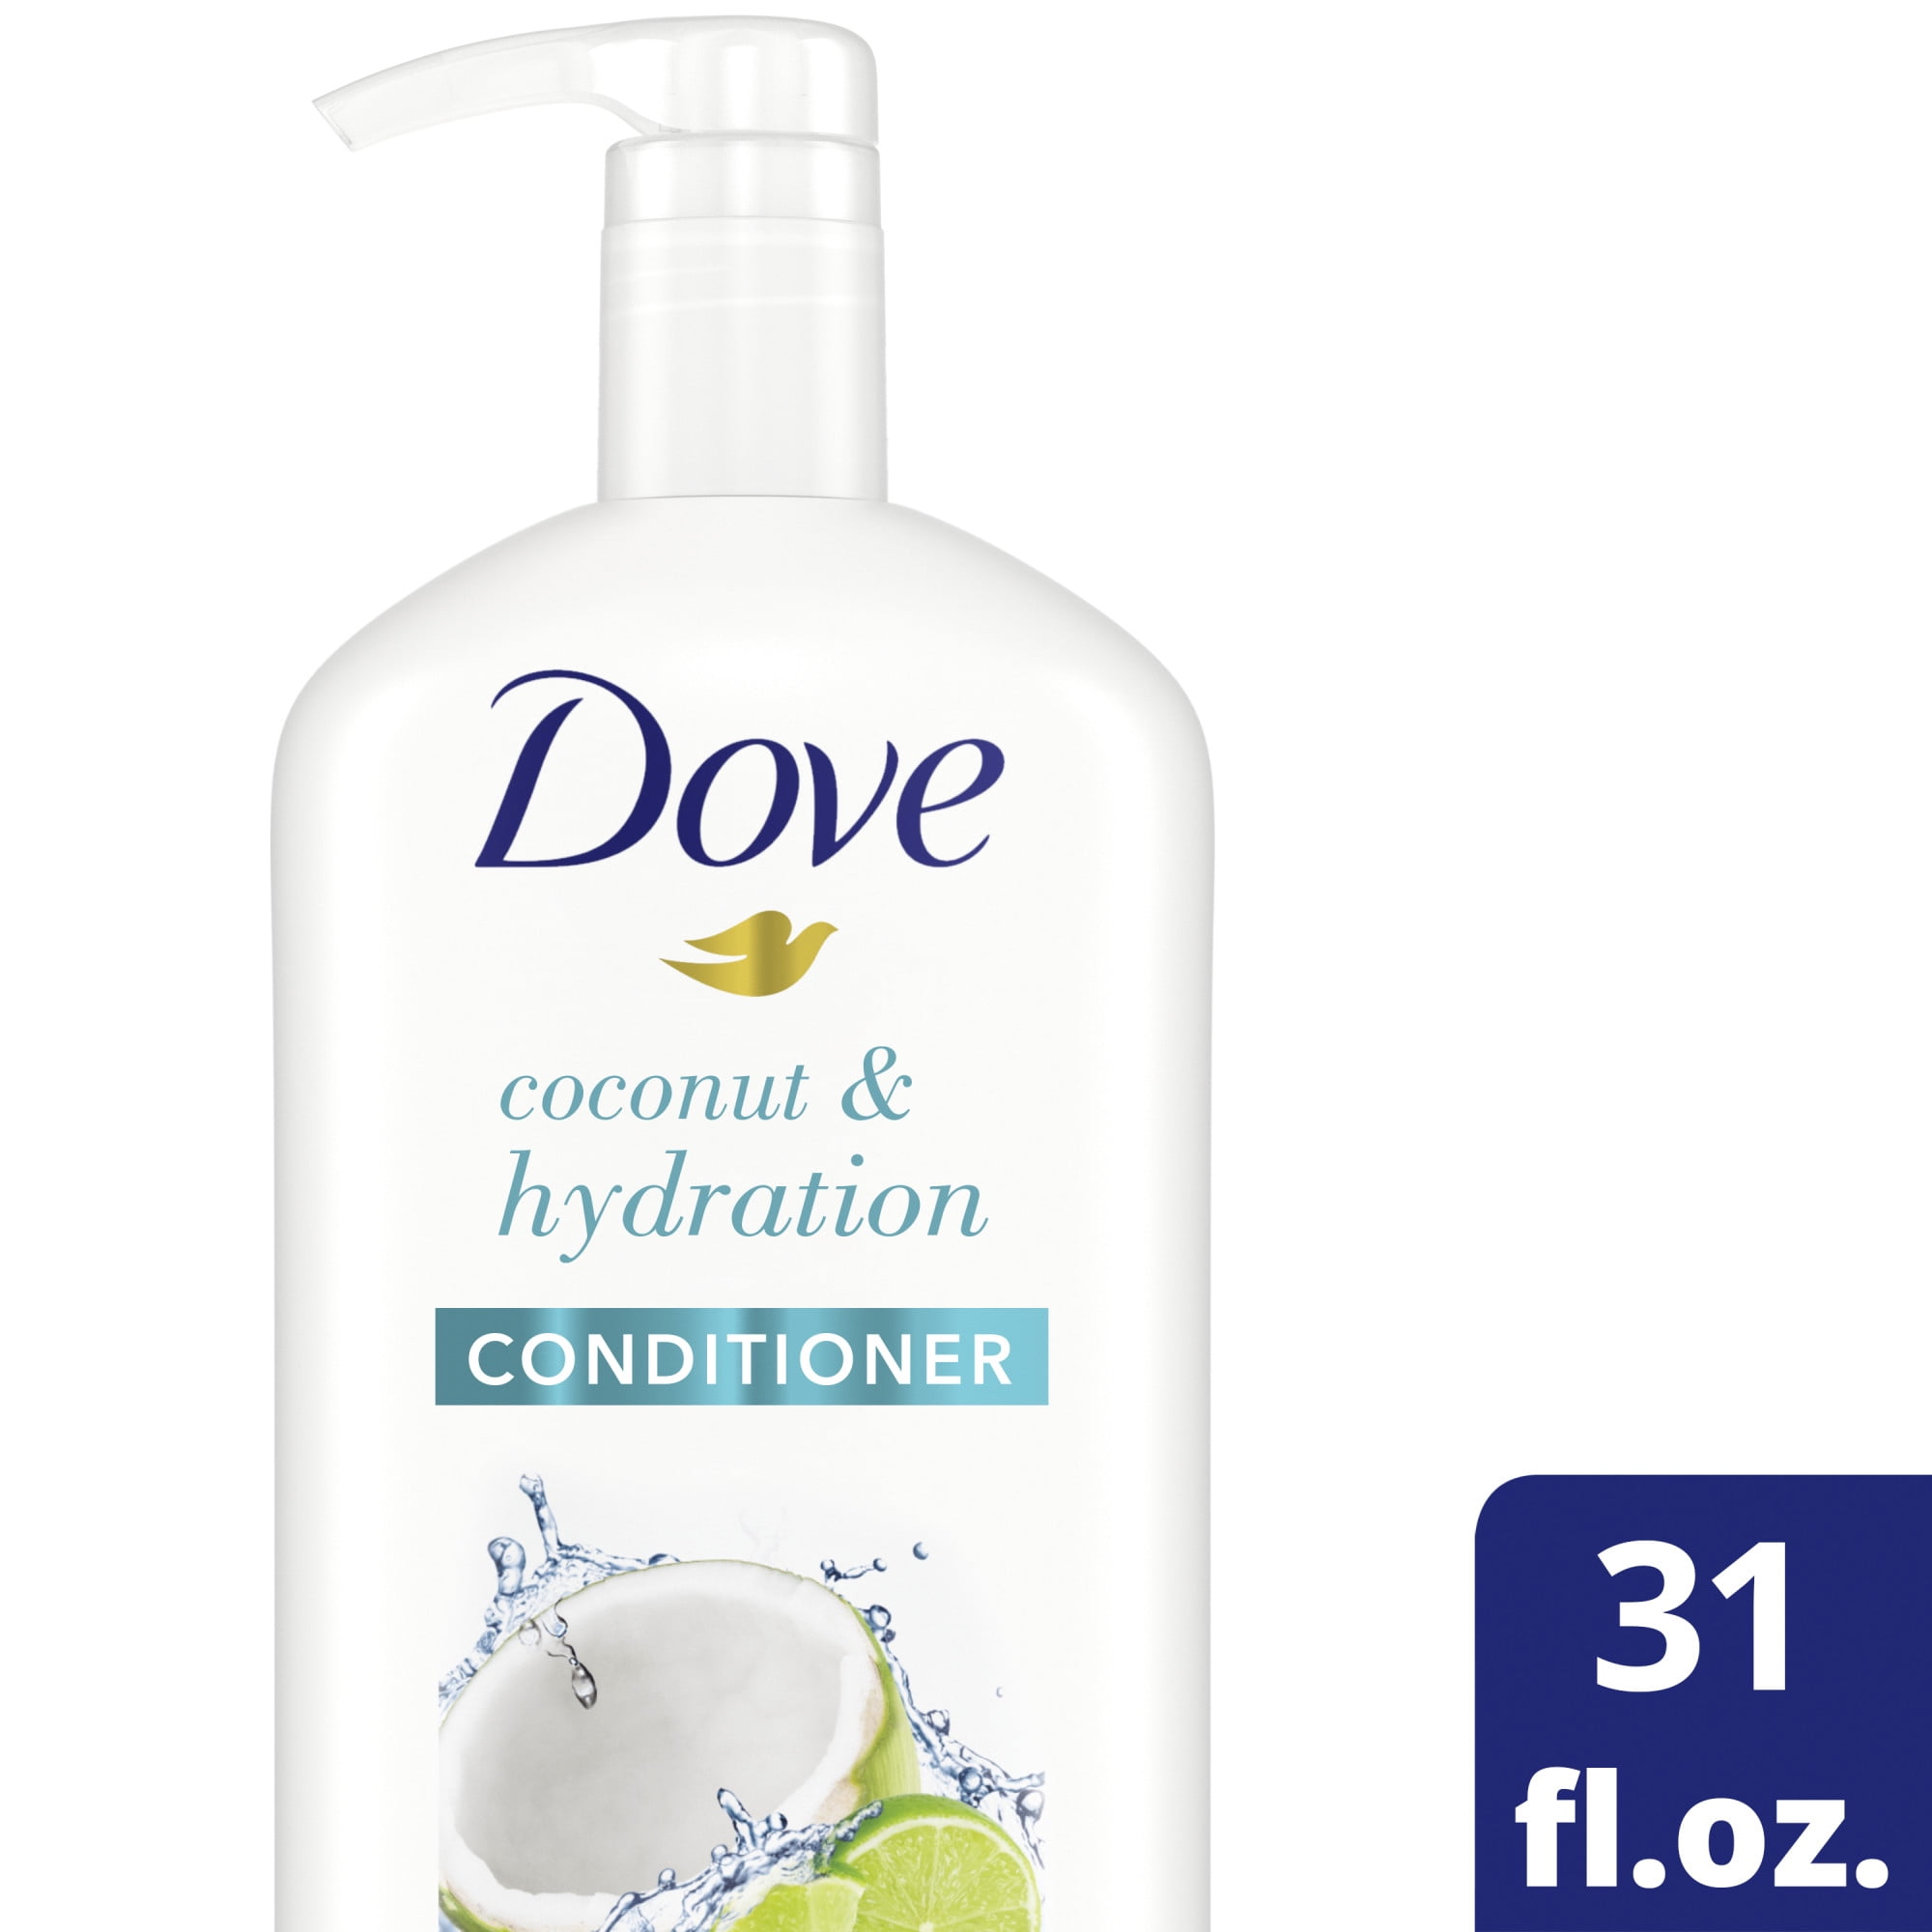 Dove Coconut & Hydration Conditioner for Dry Hair 31 fl oz